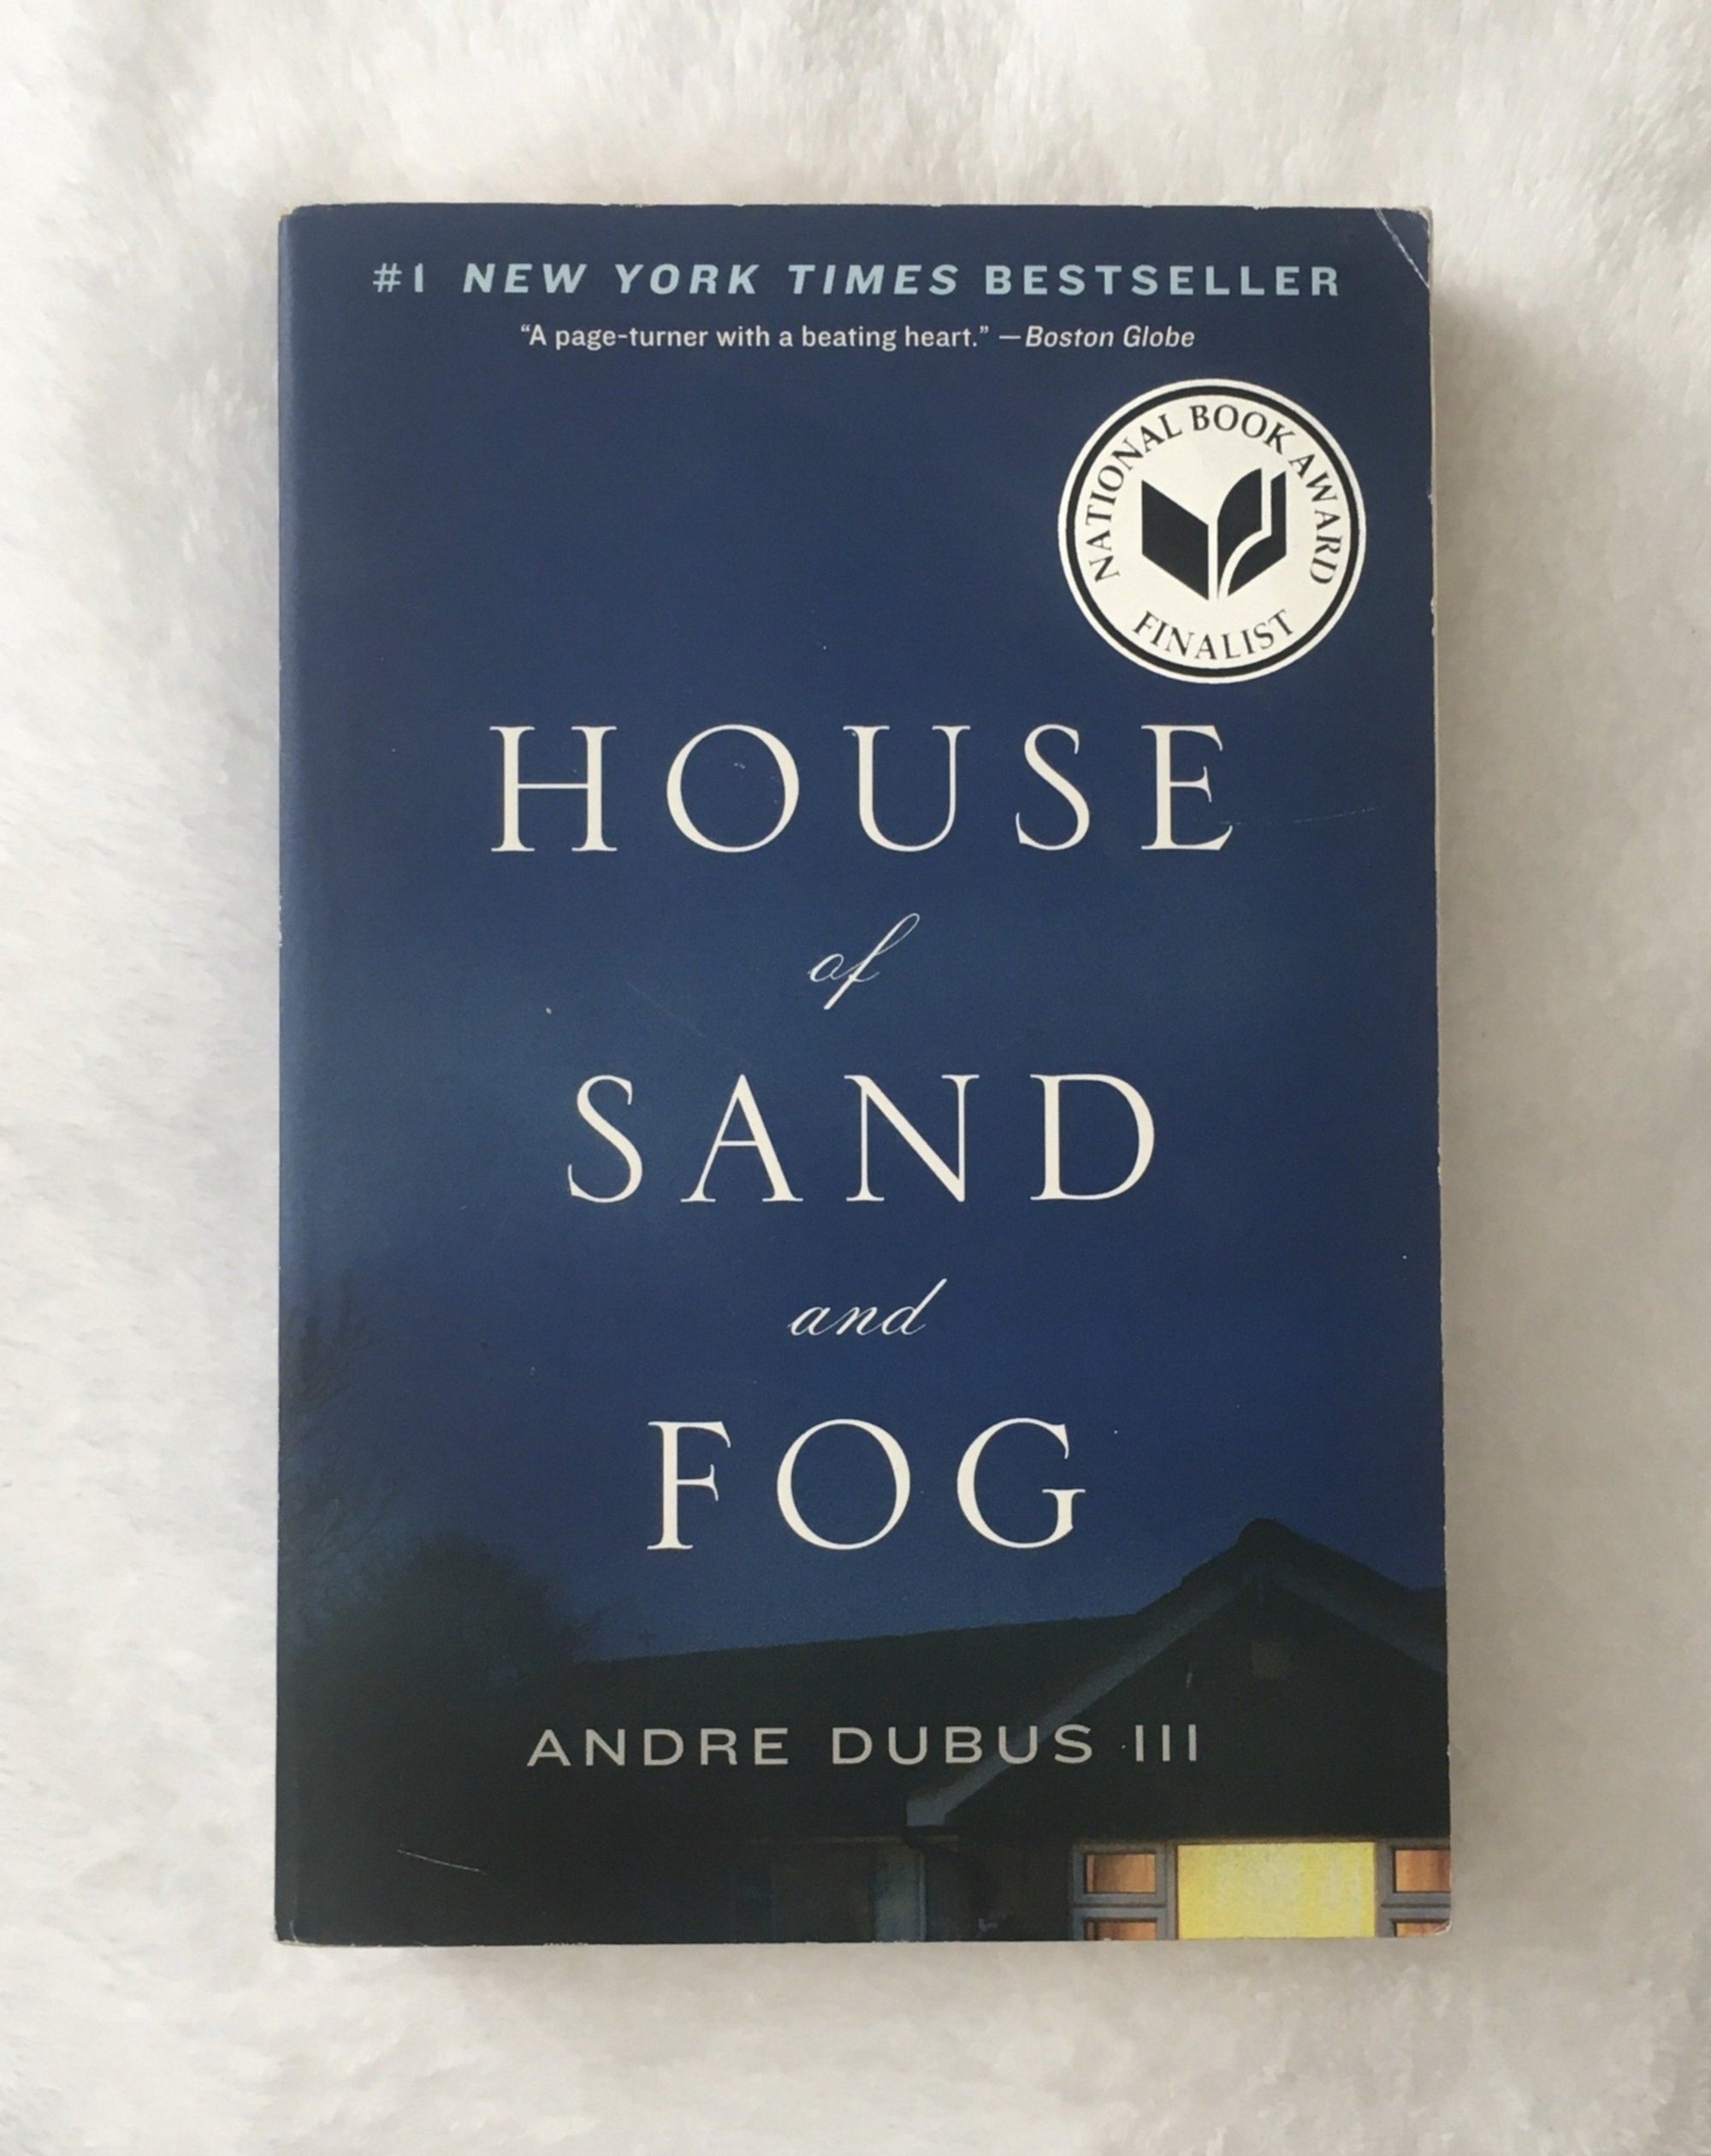 House of Sand and Fog by Andre Dubus III, book, Ten Dollar Books, Ten Dollar Books